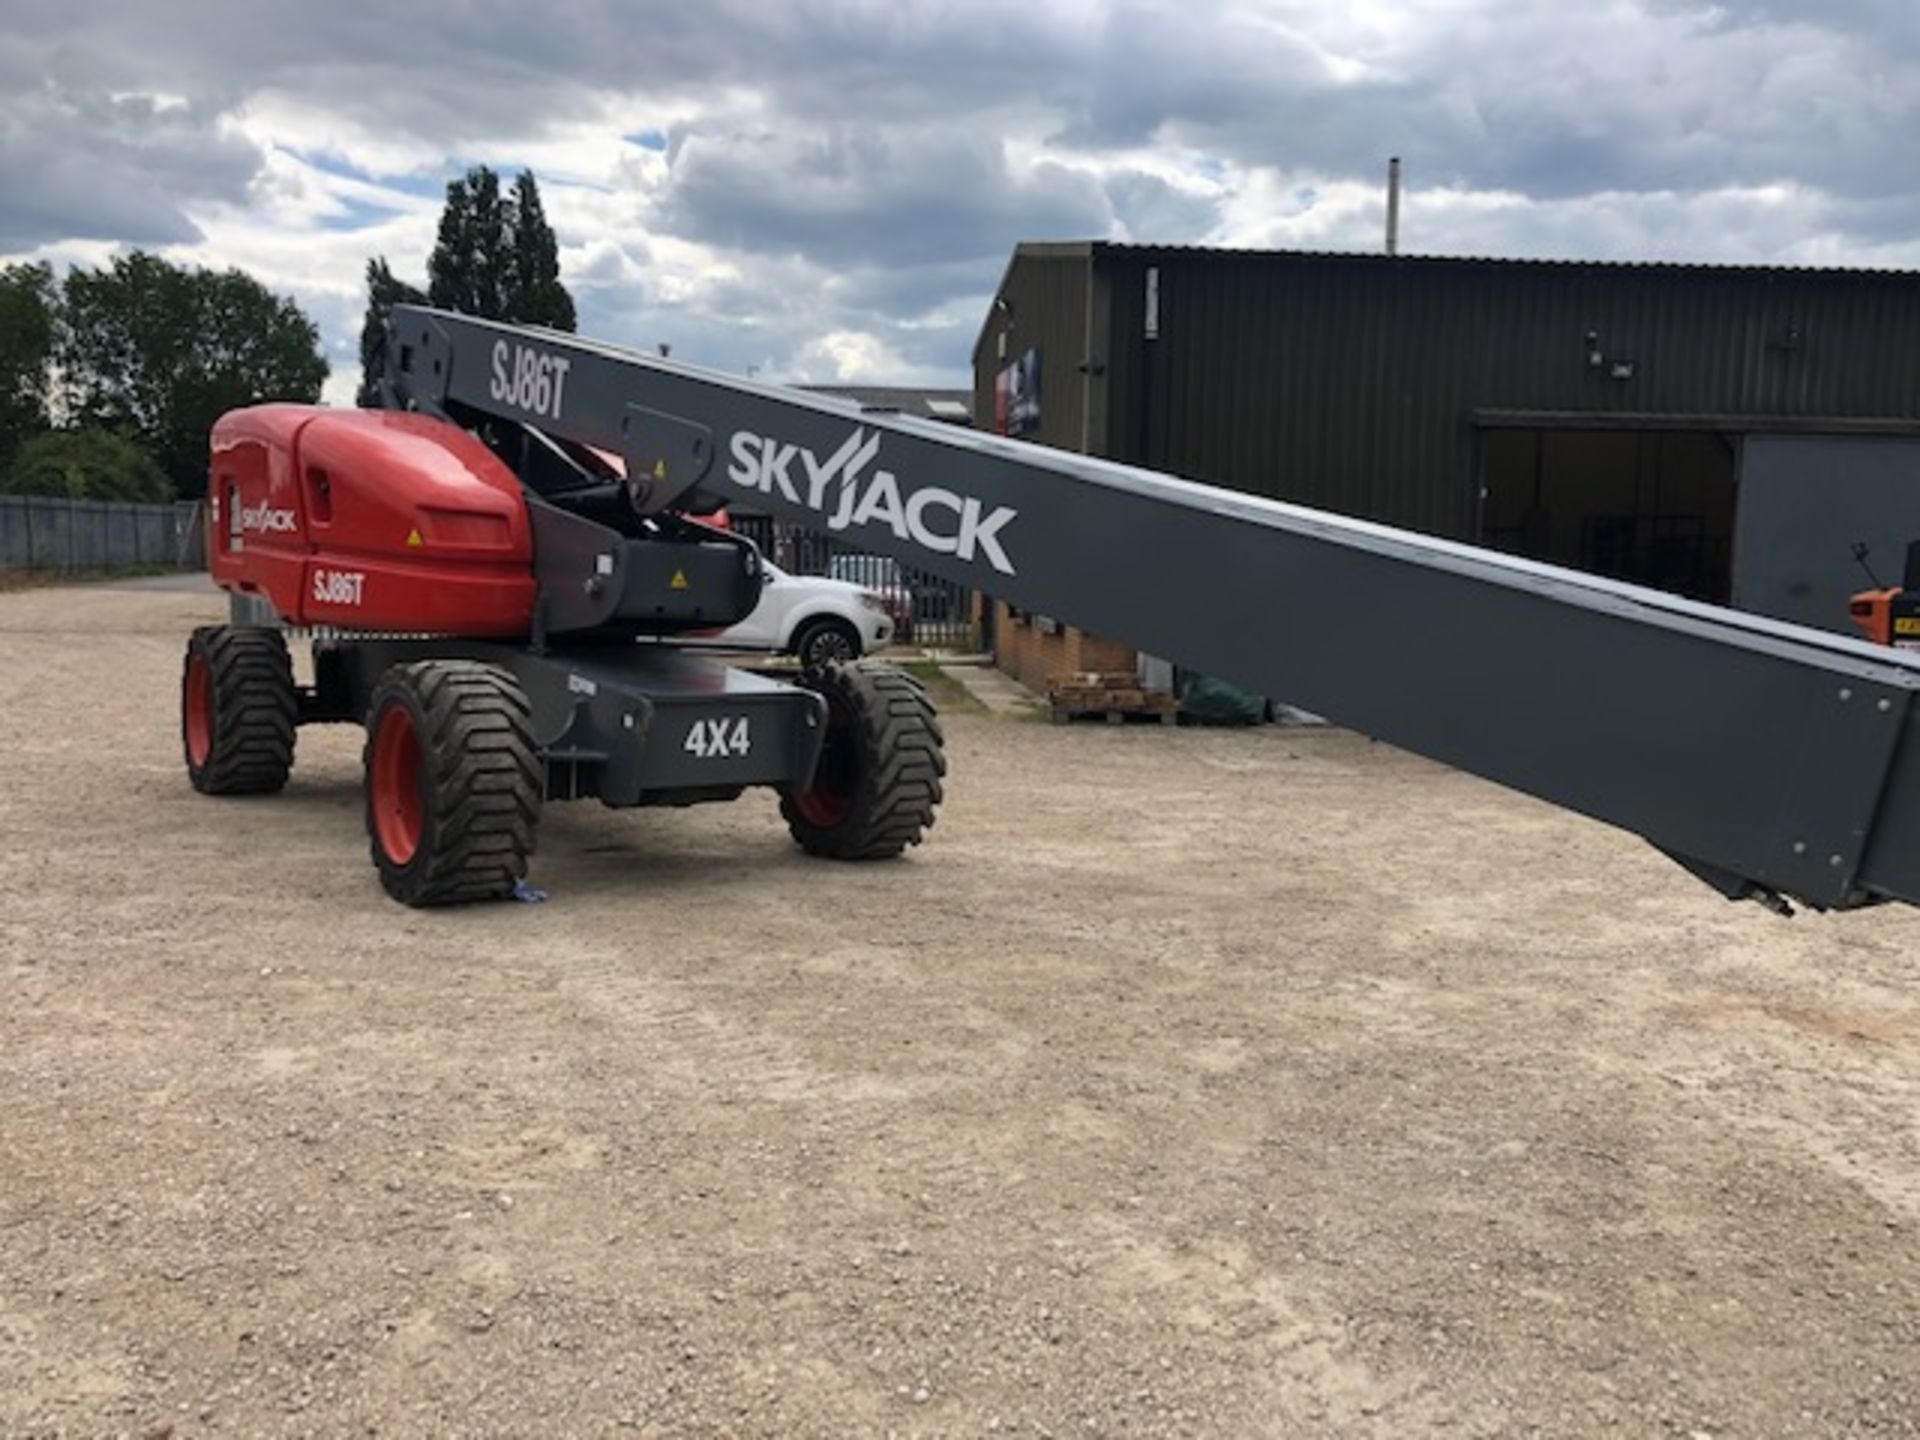 CHERRY PICKER SJ86T ACCESS PLATFORM MEWP, ONLY 260 HOURS FROM NEW, BUILT IN 2018 BUT A 2019 MODEL - Image 2 of 8